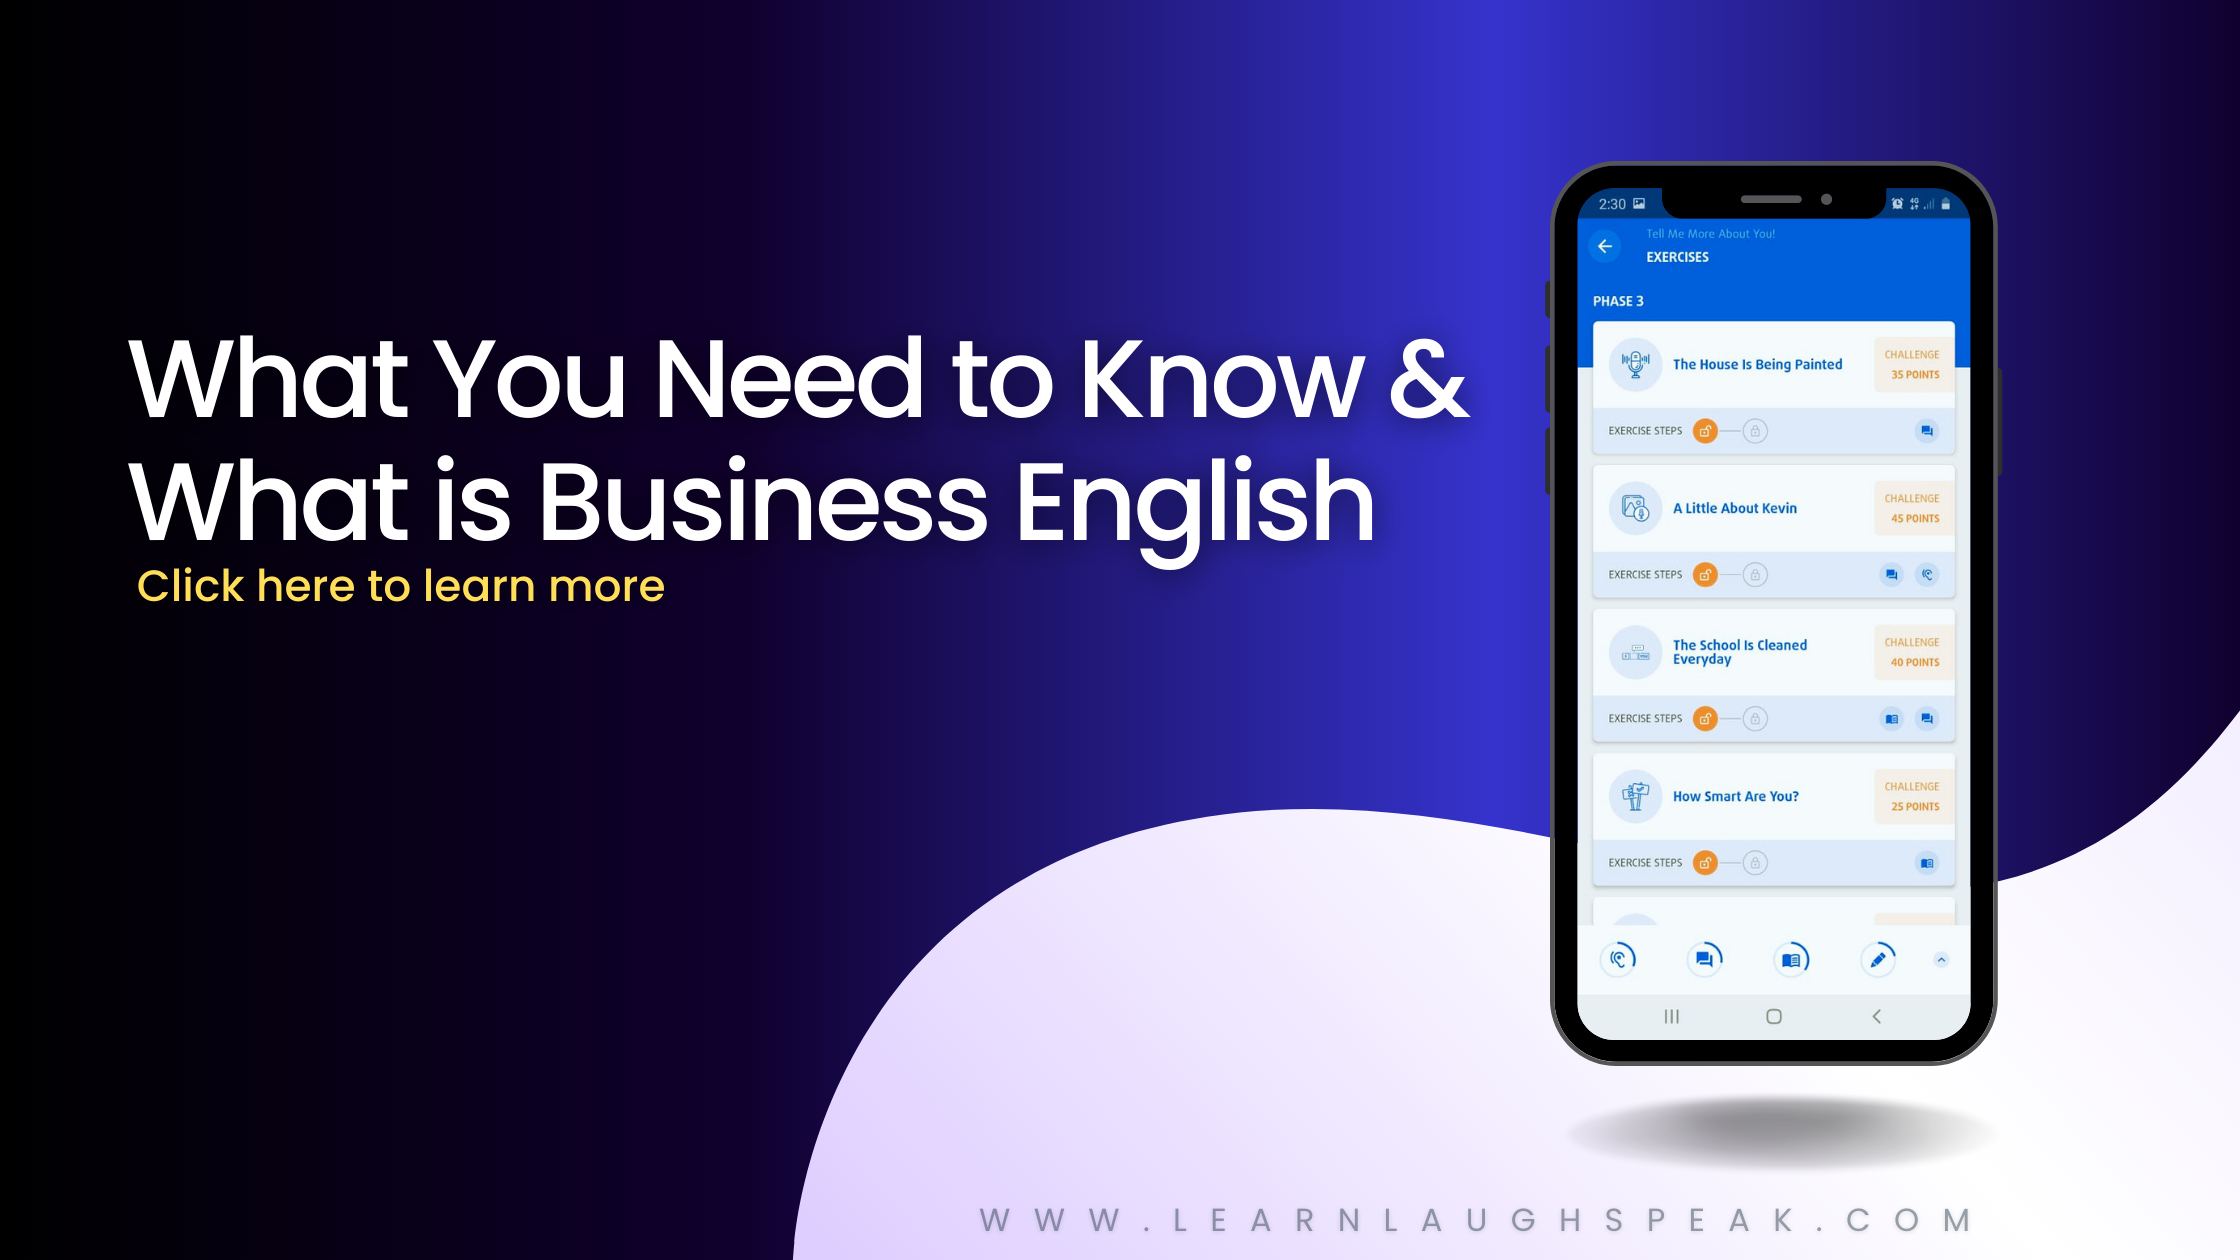 Use Business English? What You Need to Know & What is Business English